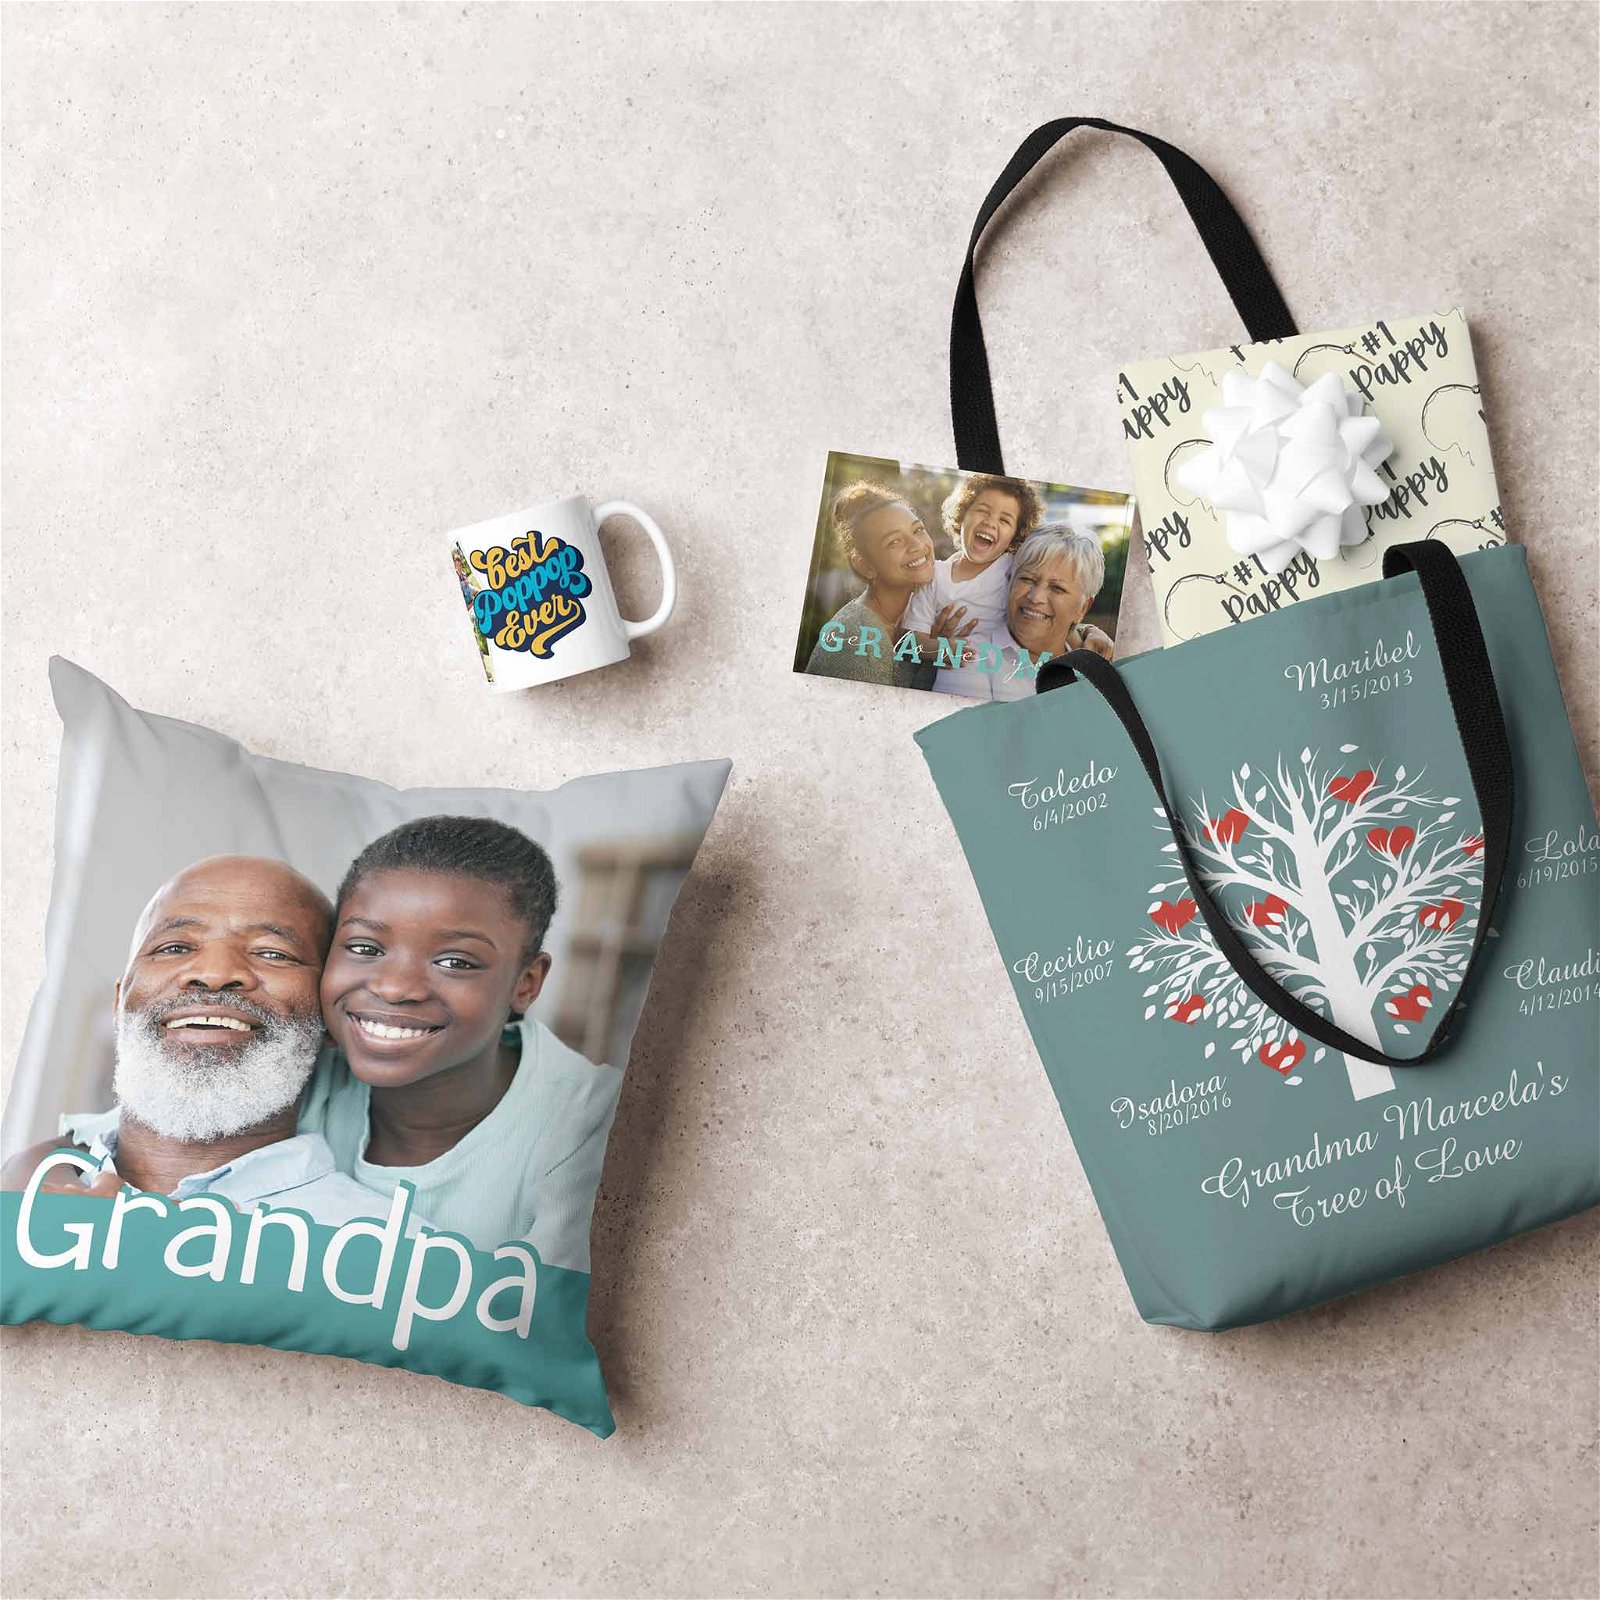 Shop Gifts for Grandparents